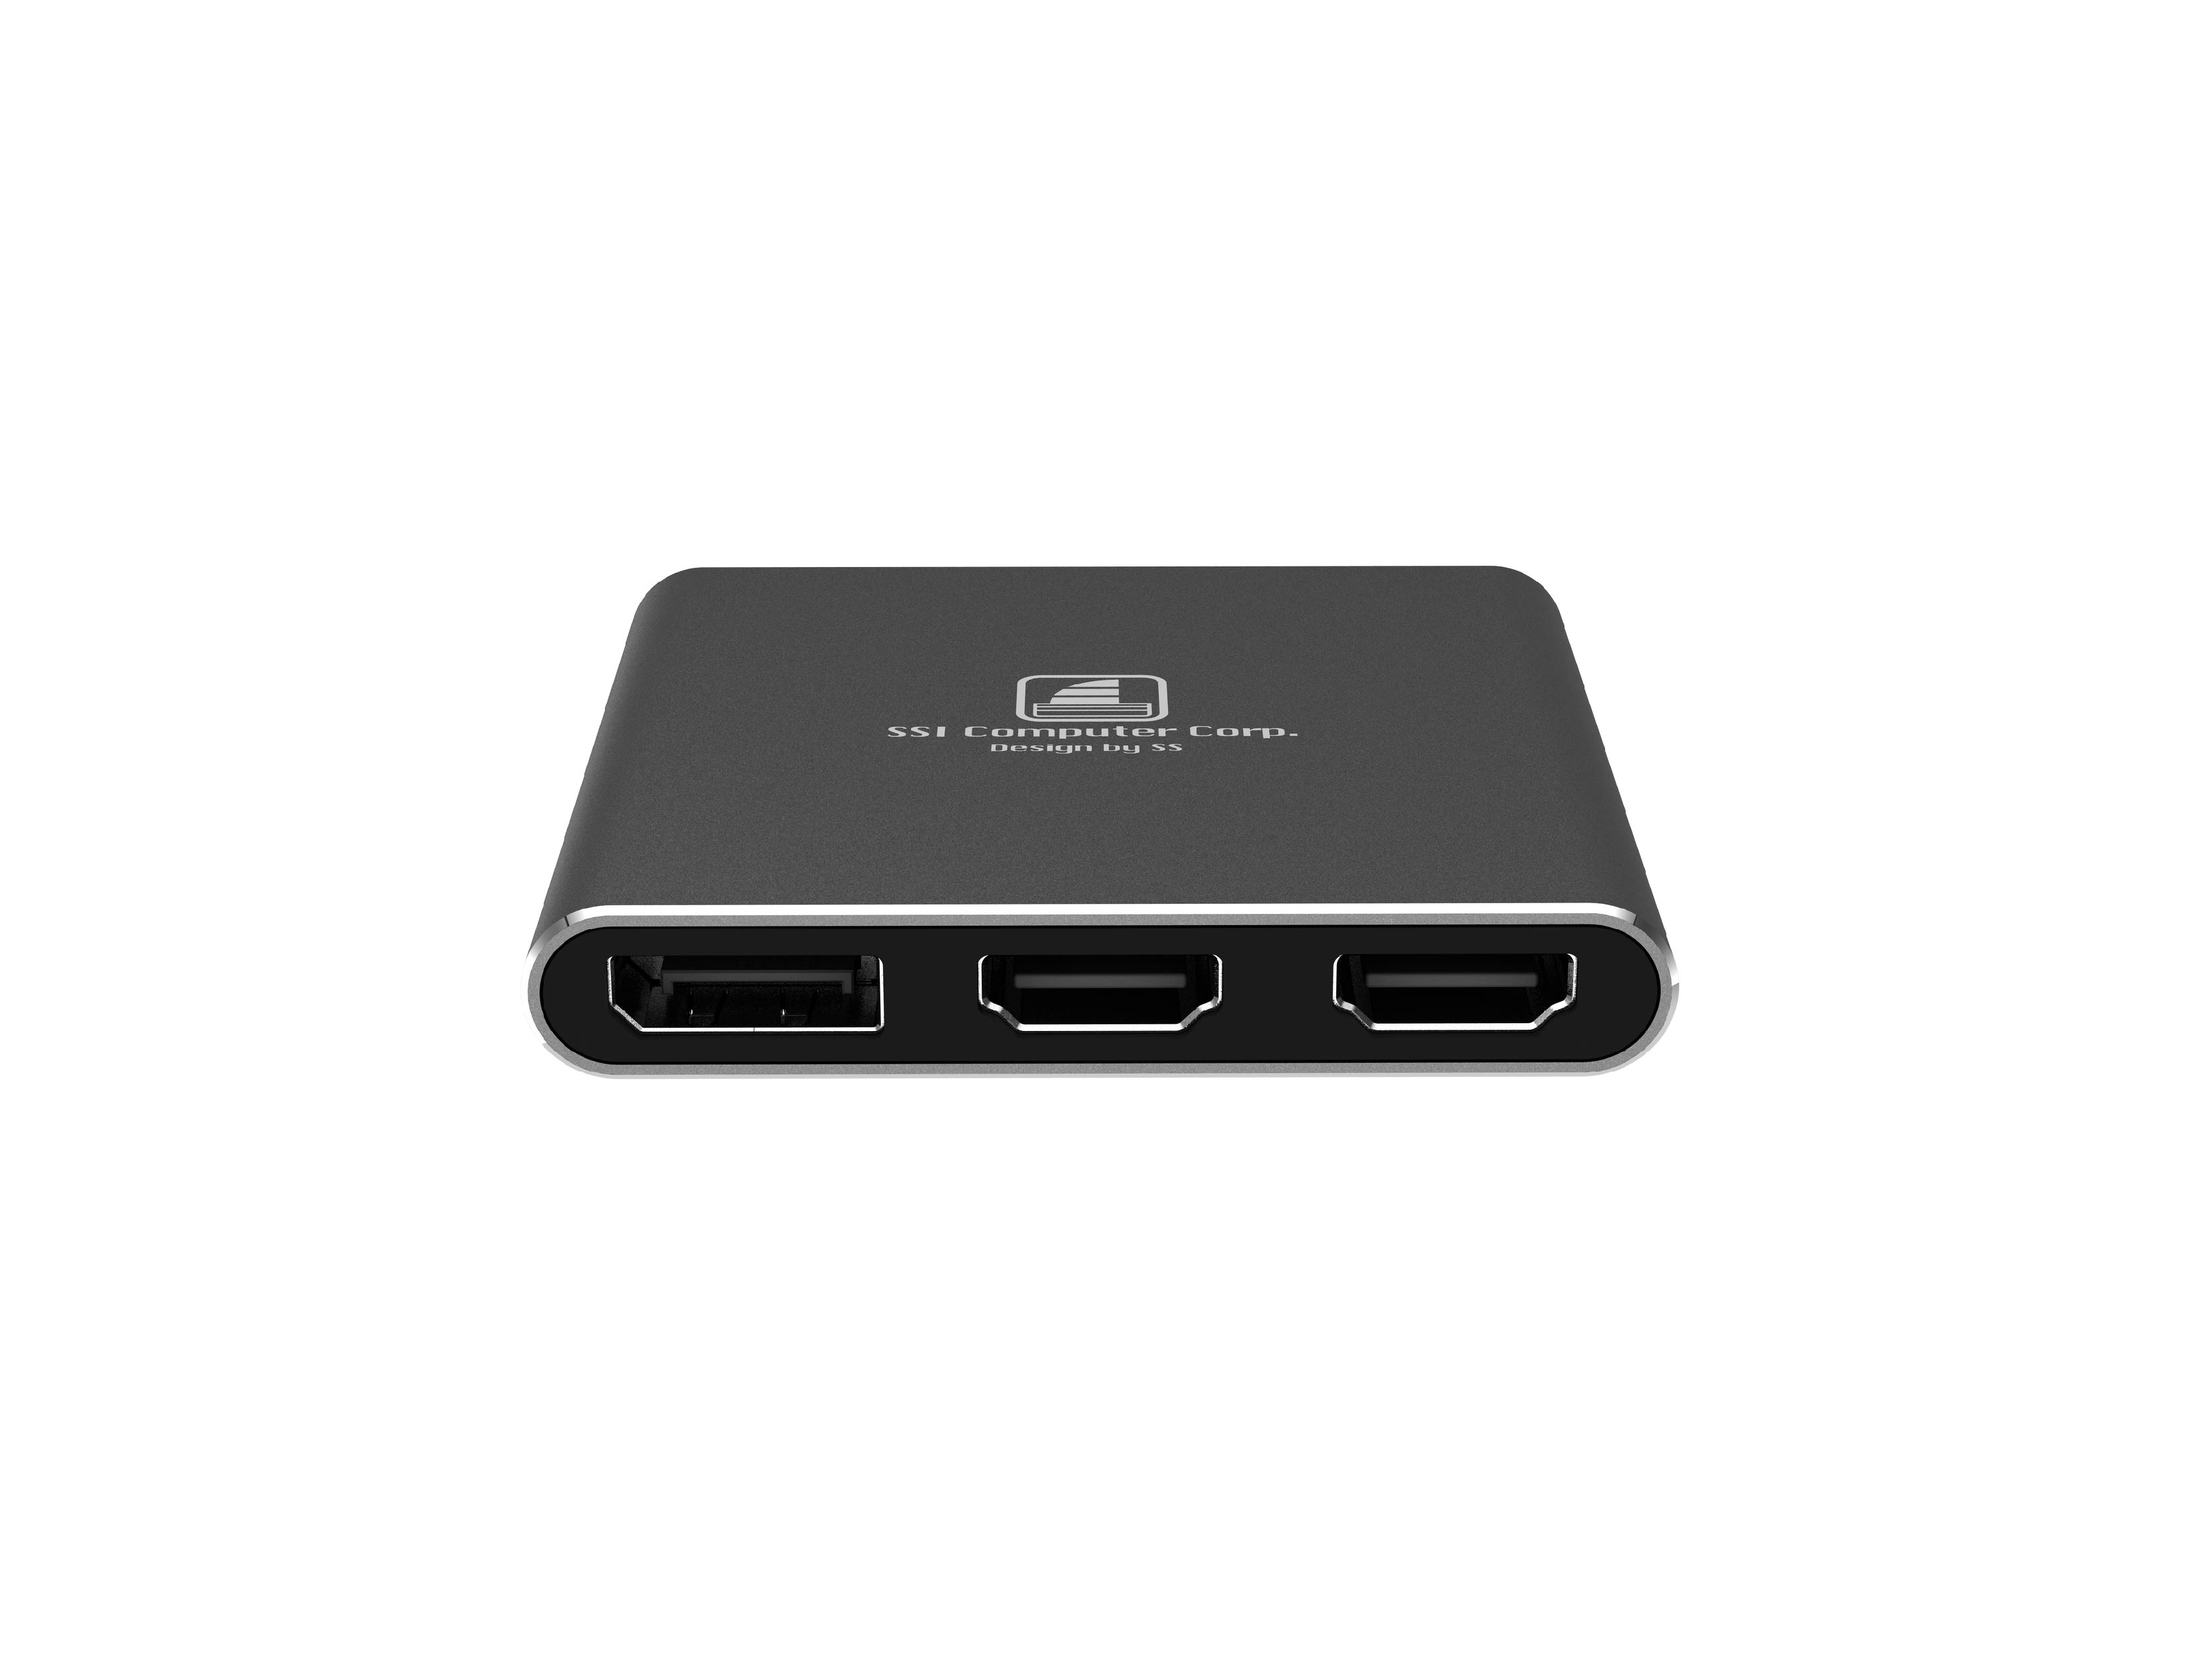 3 Port DP/HDMI MST HUB (SI-4073HDMI), 3 Port DP/HDMI MST HUB, USB-C to HDMIx1 and DPx2 adapter, compatible TB3 or USB-C with DP function.